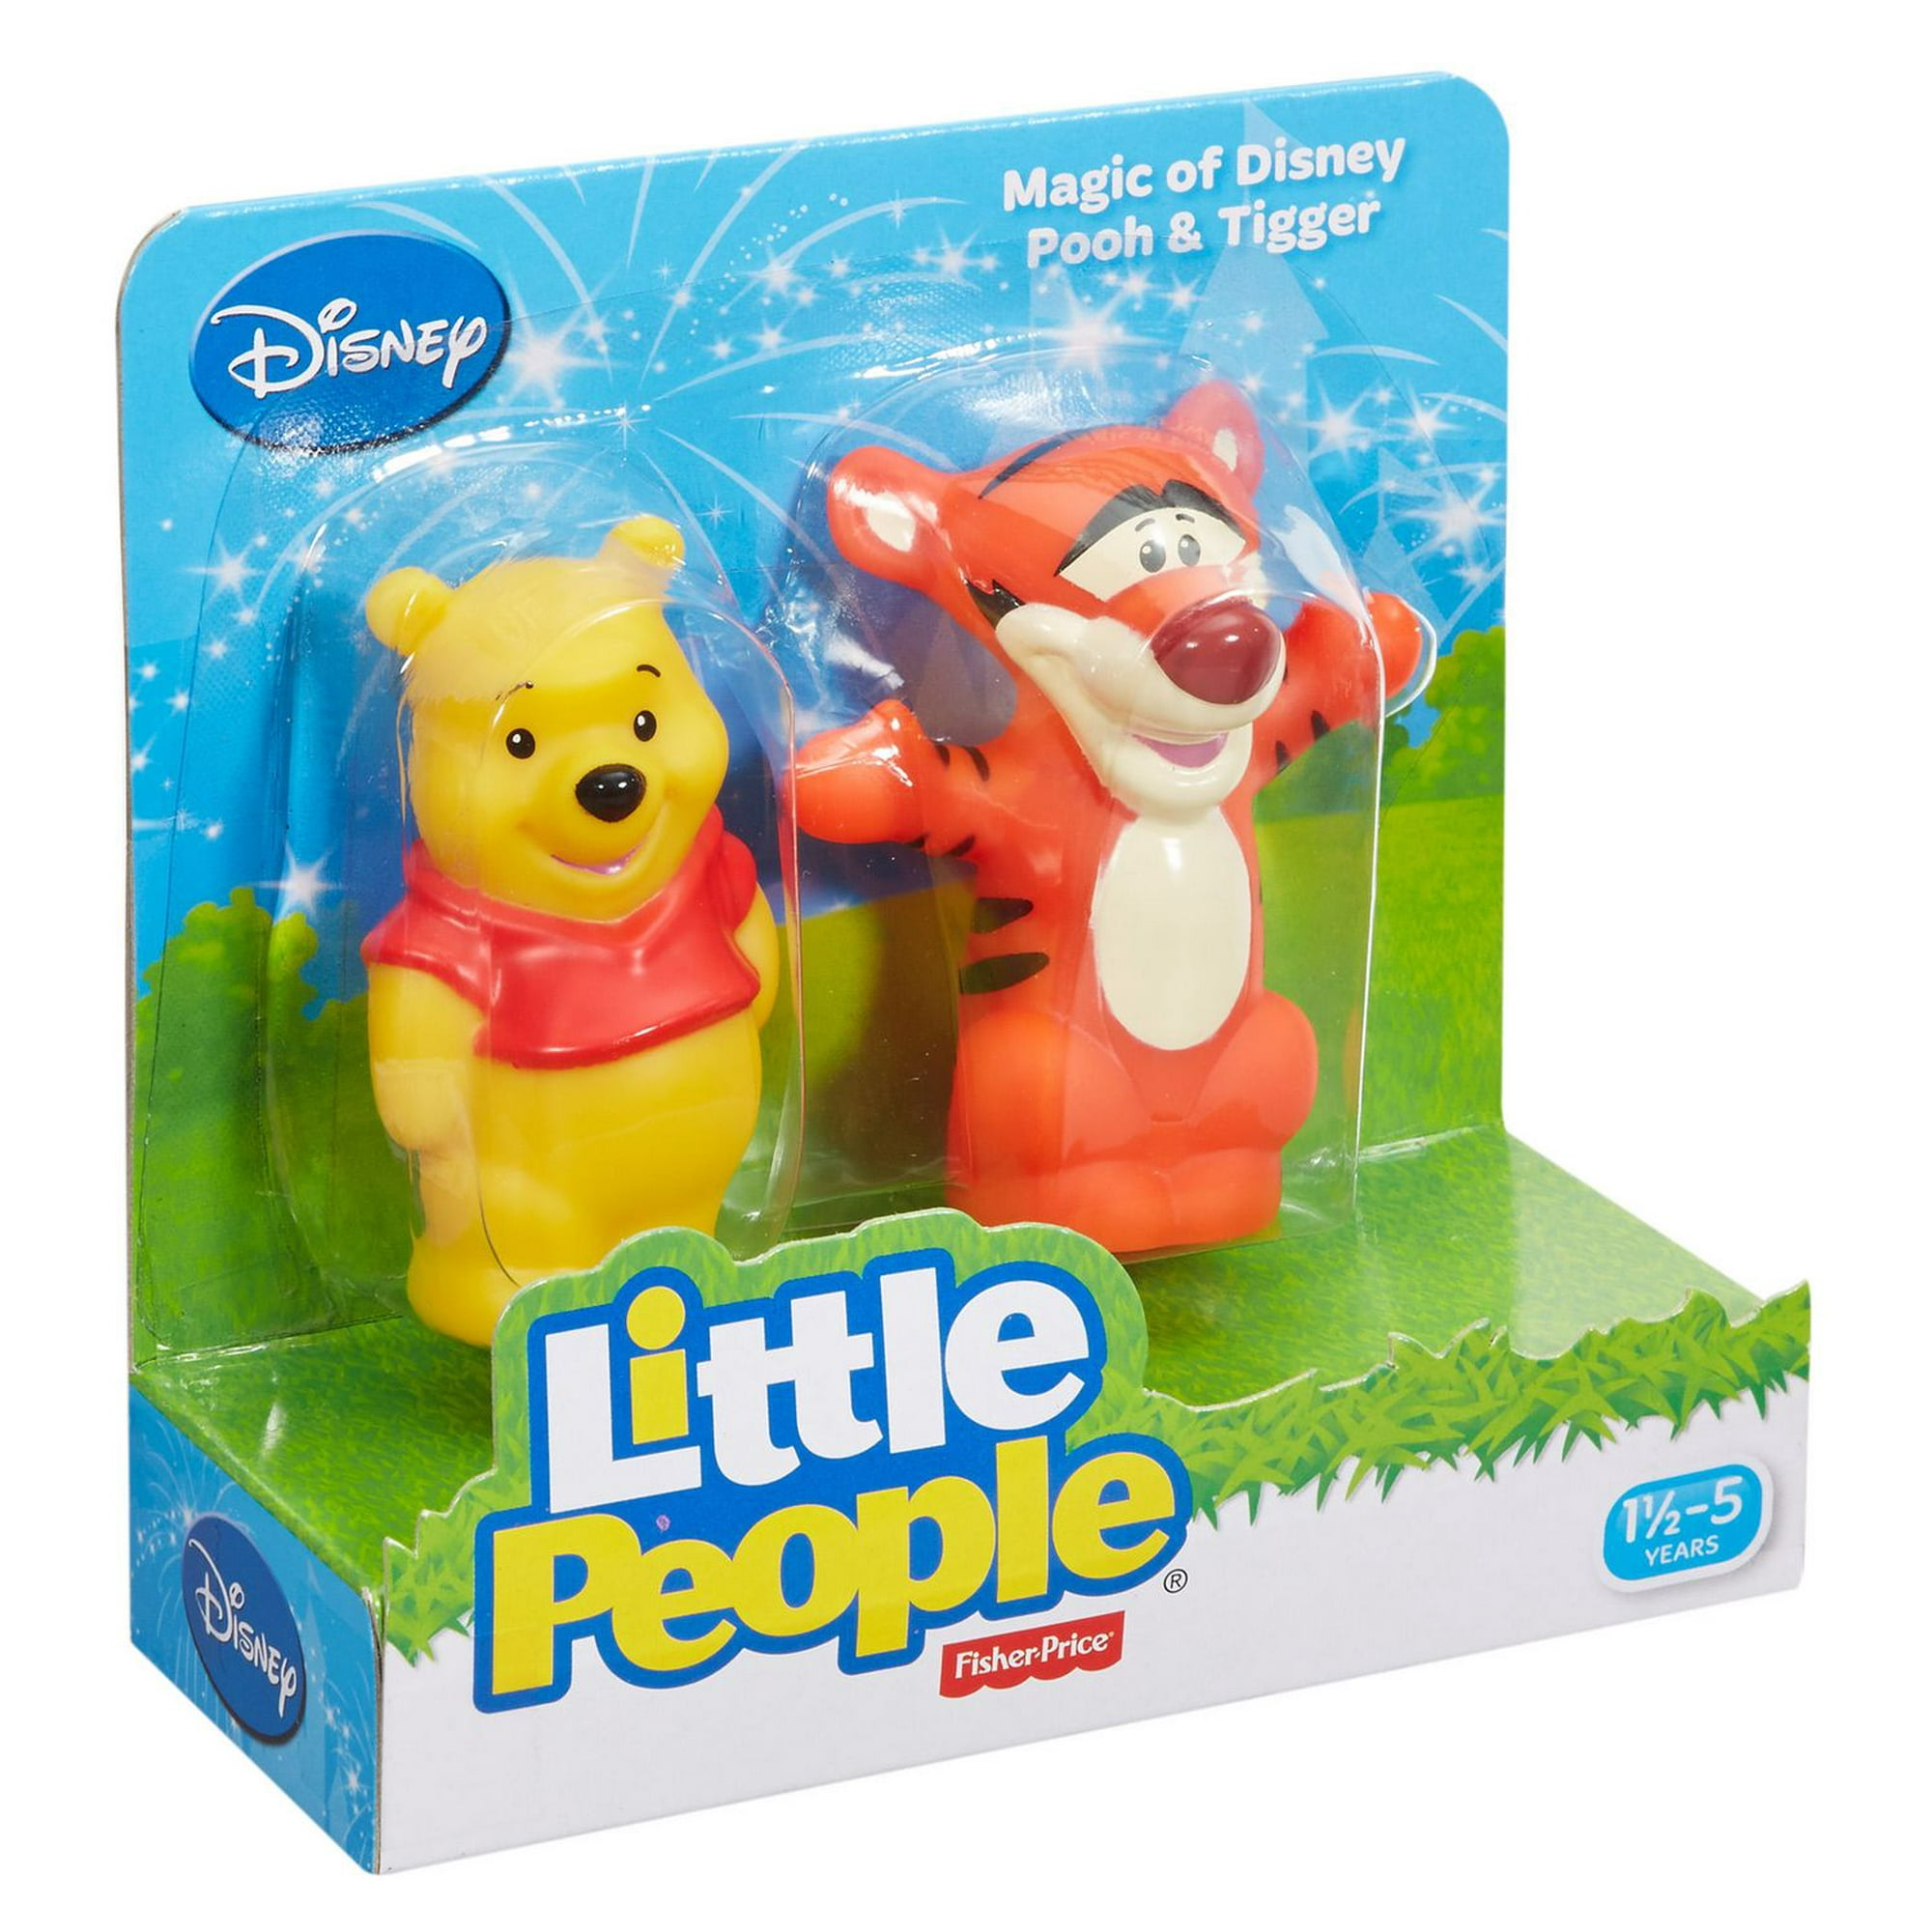 Fisher-Price Little People Magic of Disney Pooh & Tigger Friends